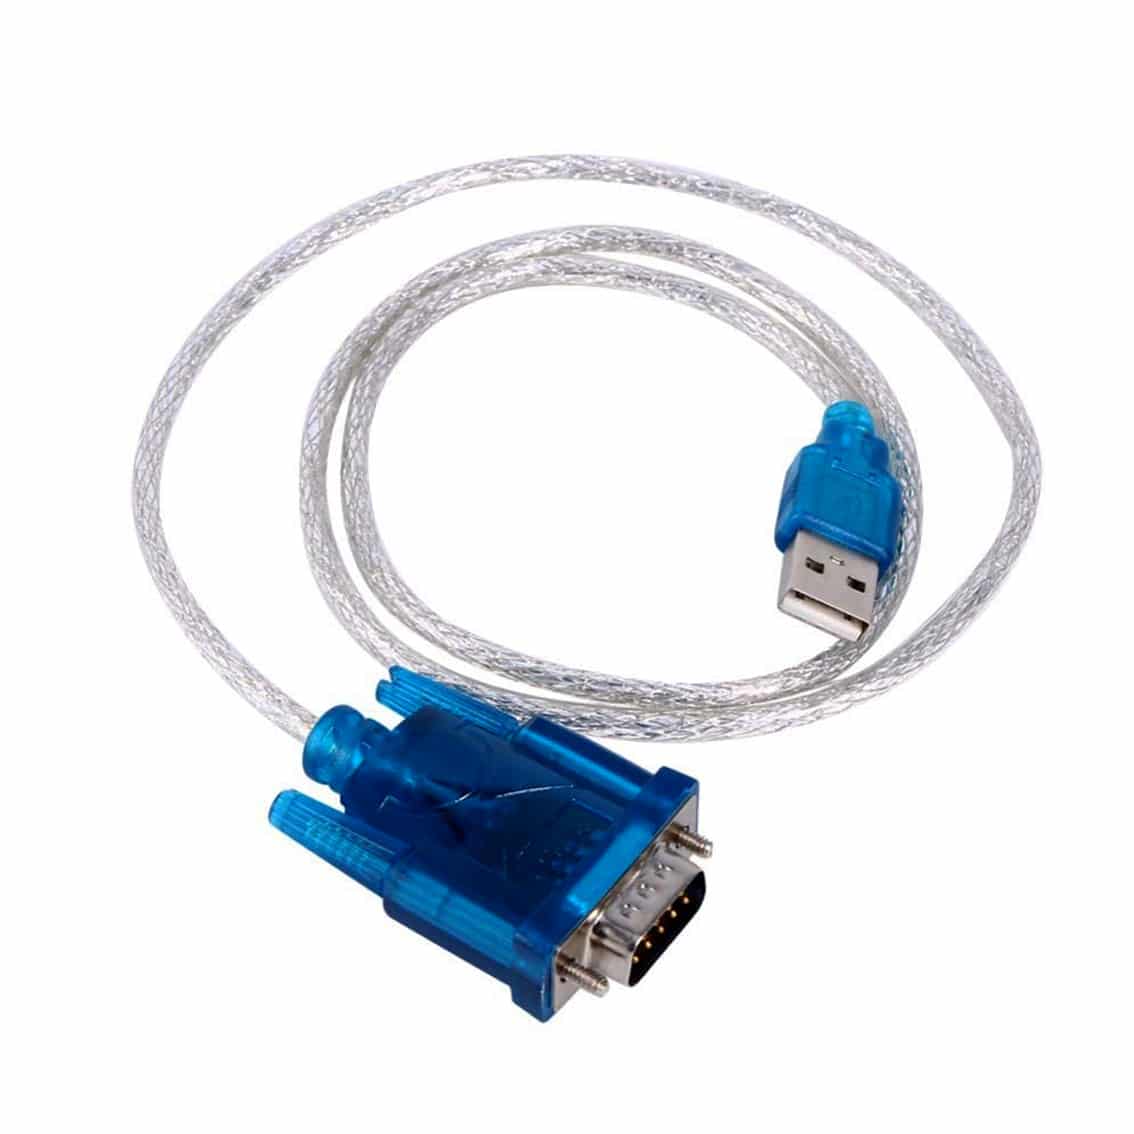 USB to RS232 DB9 Serial Port Converter Adapter Cable | Phipps Electronics